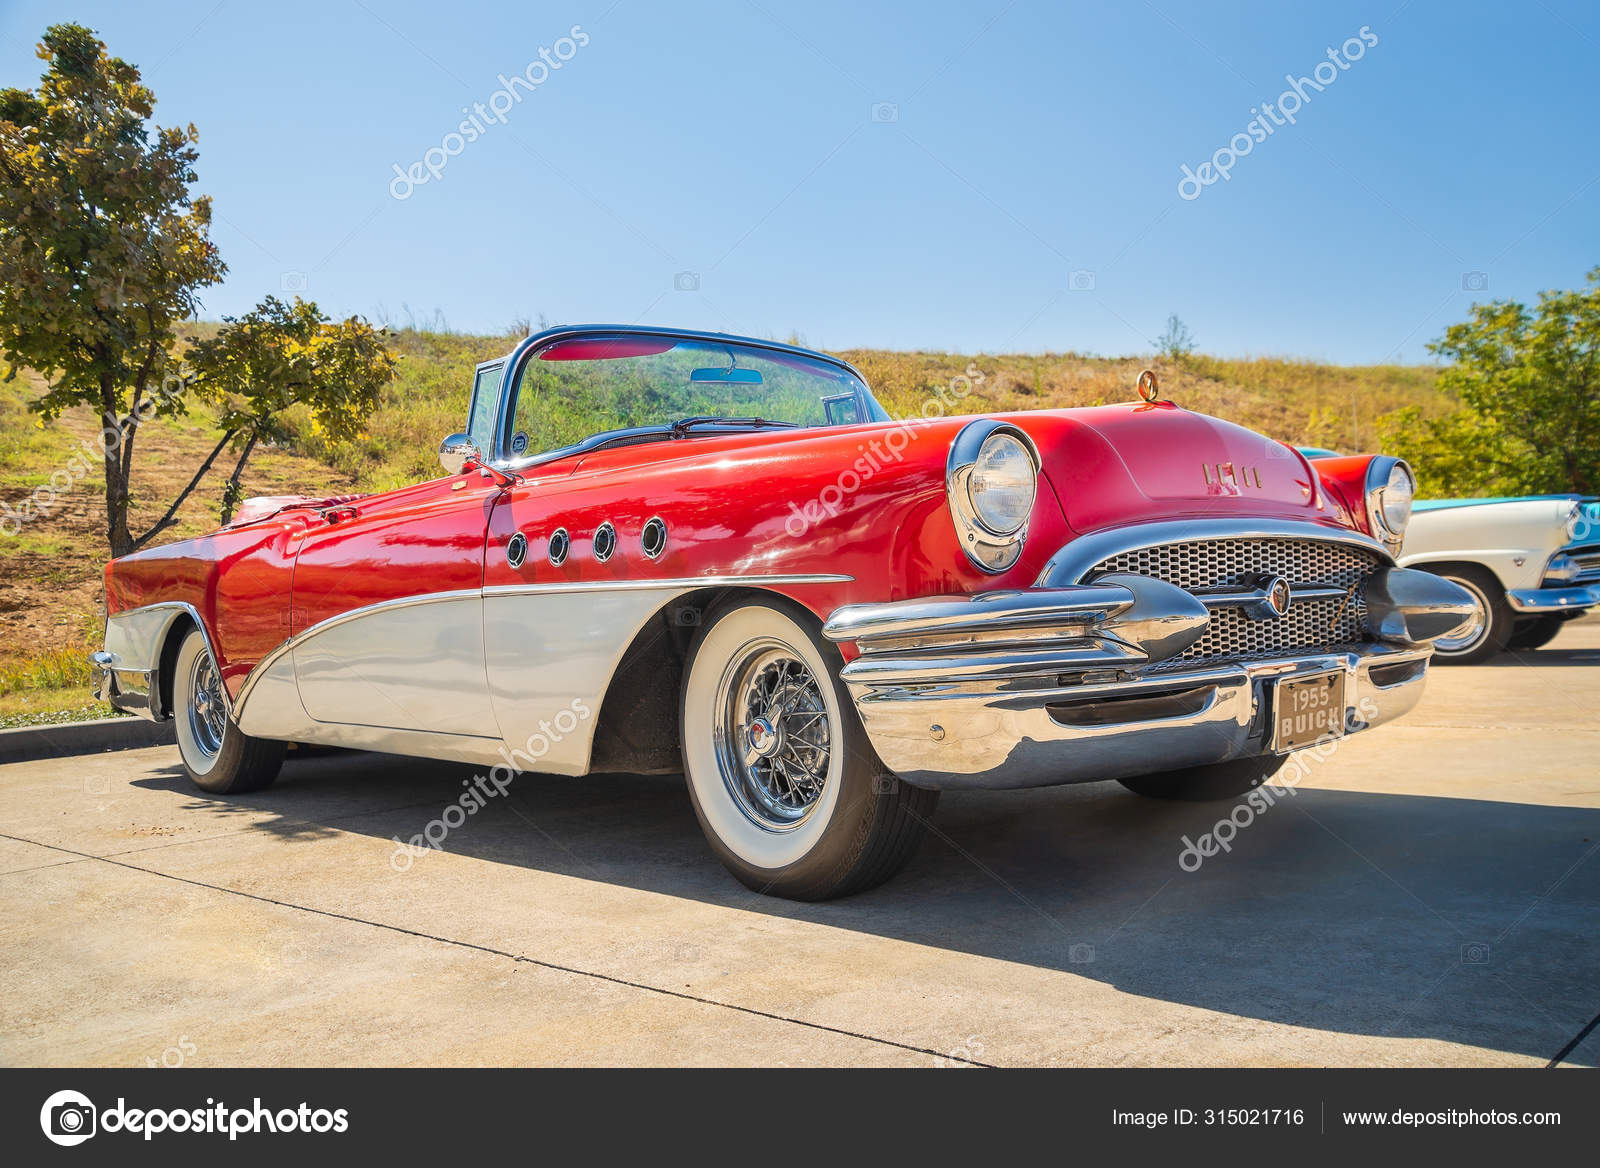 Red vintage 1955 convertible – Stock Editorial Photo © #315021716